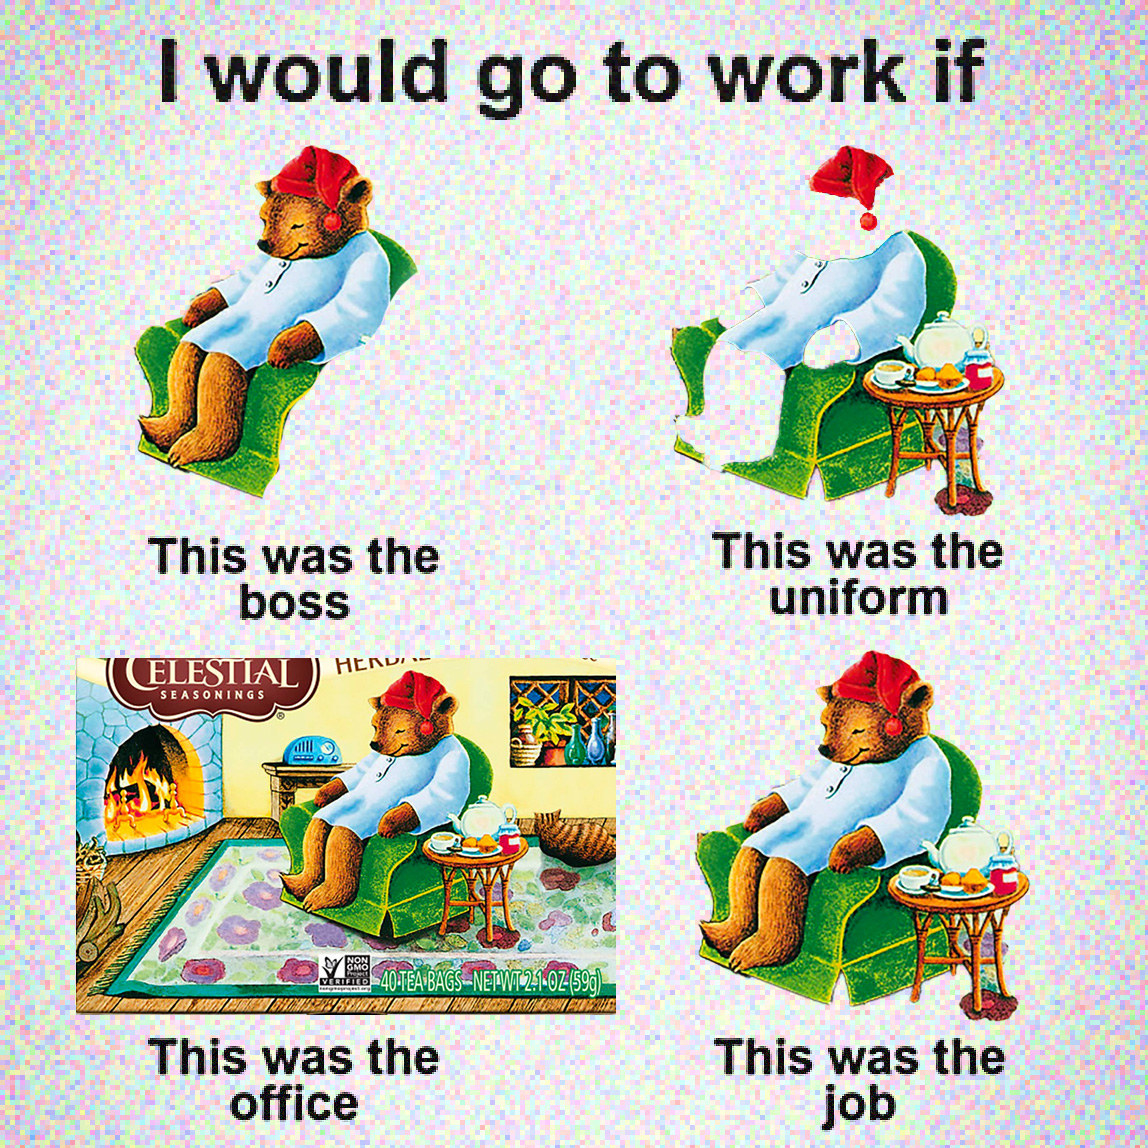 anthropomorphic bear in red sleeping cap, green armchair. &quot;I would go to work if,&quot; &quot;this was the boss&quot; r= the bear, &quot;This was the uniform&quot; = sleeping cap/gown, &quot;This was the office&quot; = cozy room, &quot;this was the job&quot; = sleep